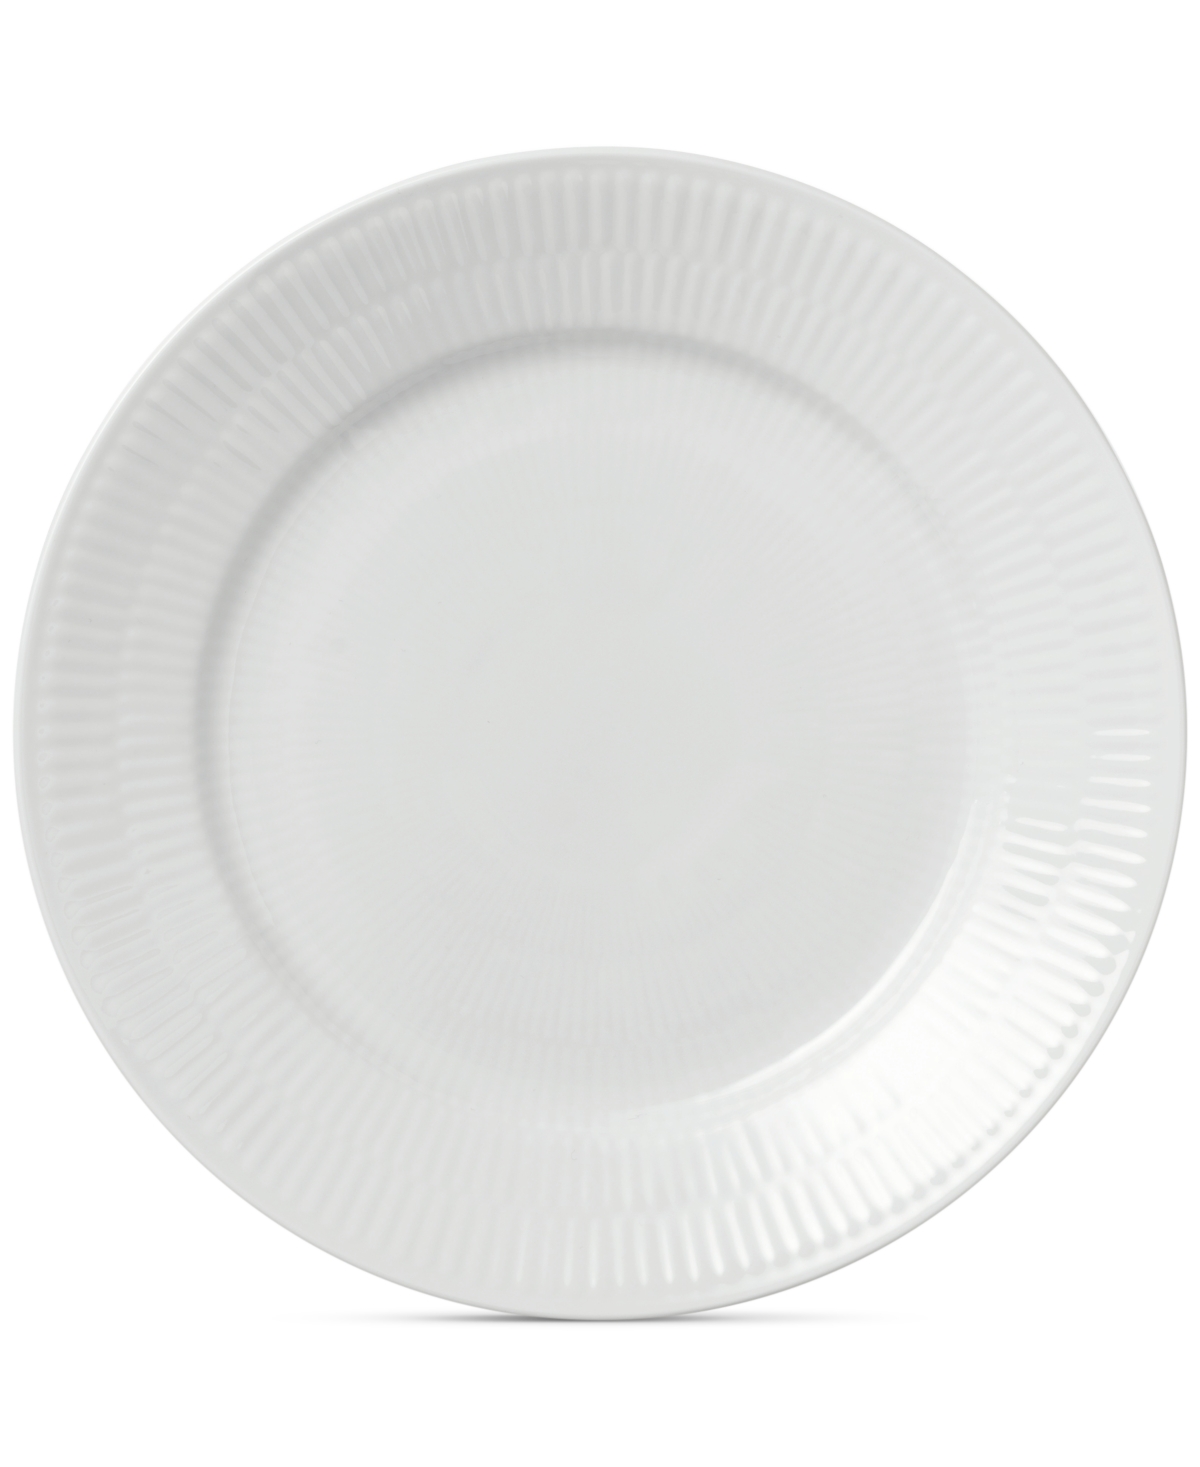 White Fluted Salad Plate - White